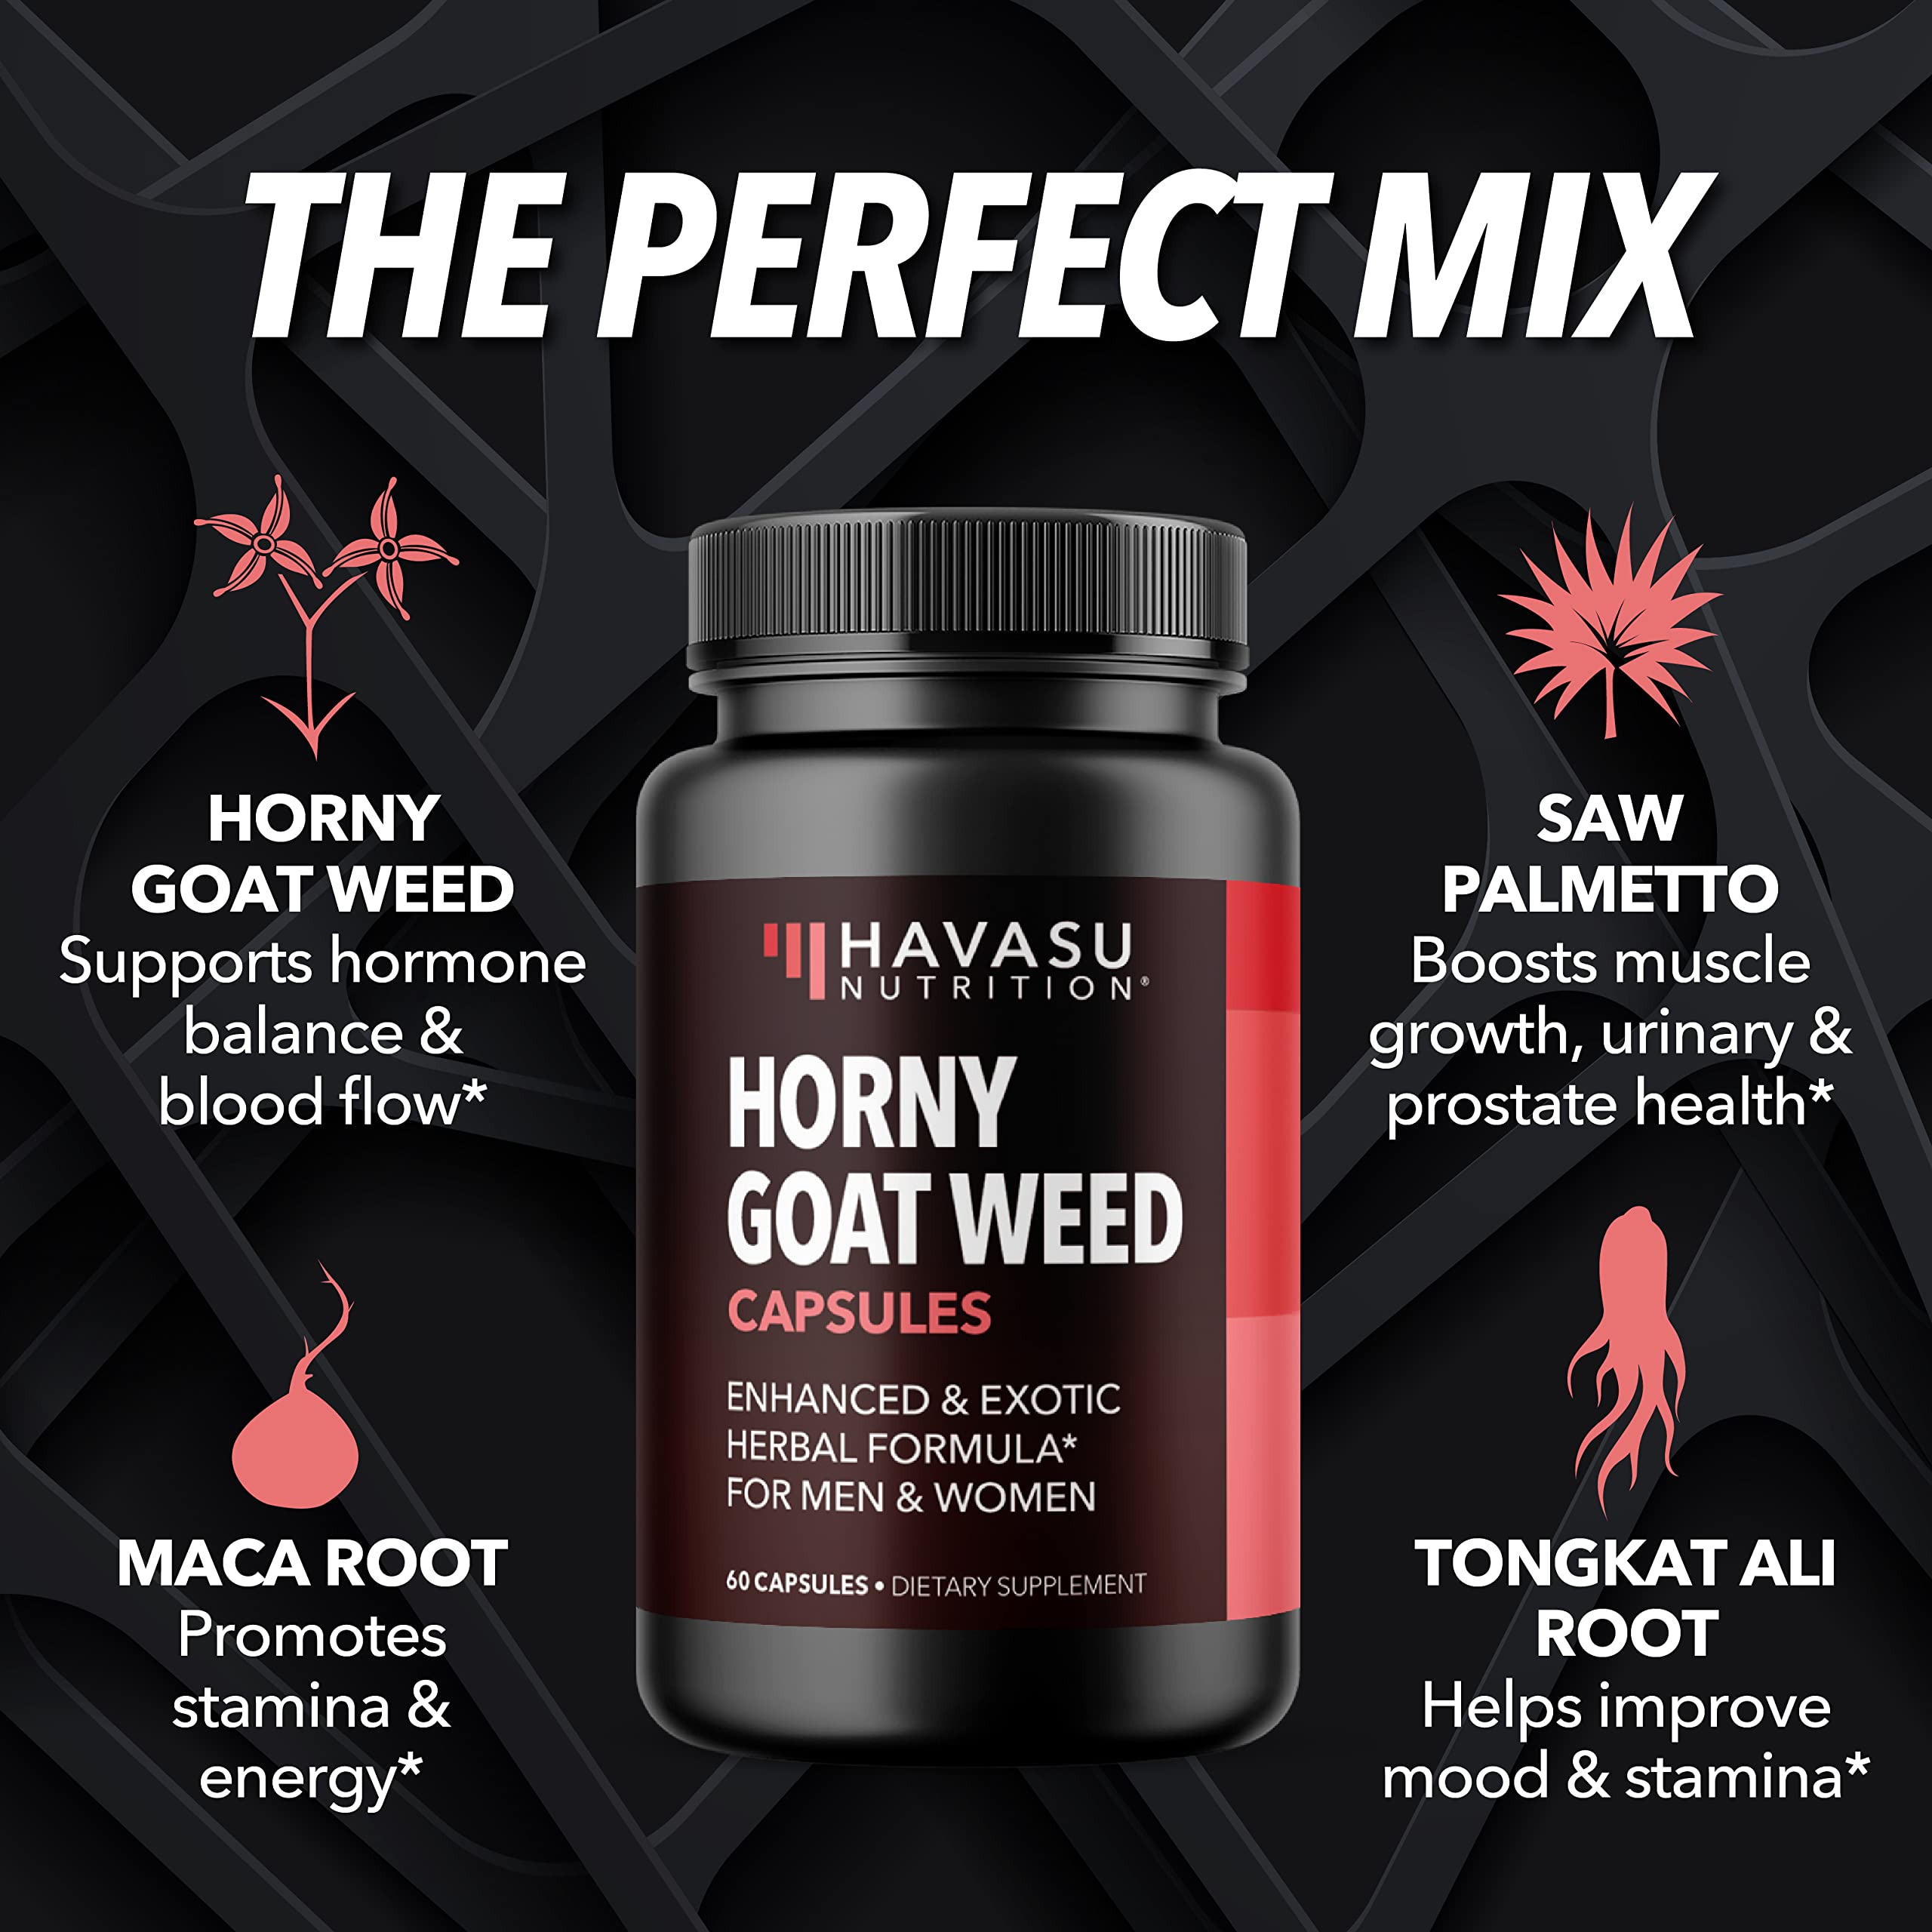 Horny Goat Weed Supplement for Him & Her | Formulated with Maca Root L-Arginine & Muira Puama for Natural Energy & Optimal Endurance